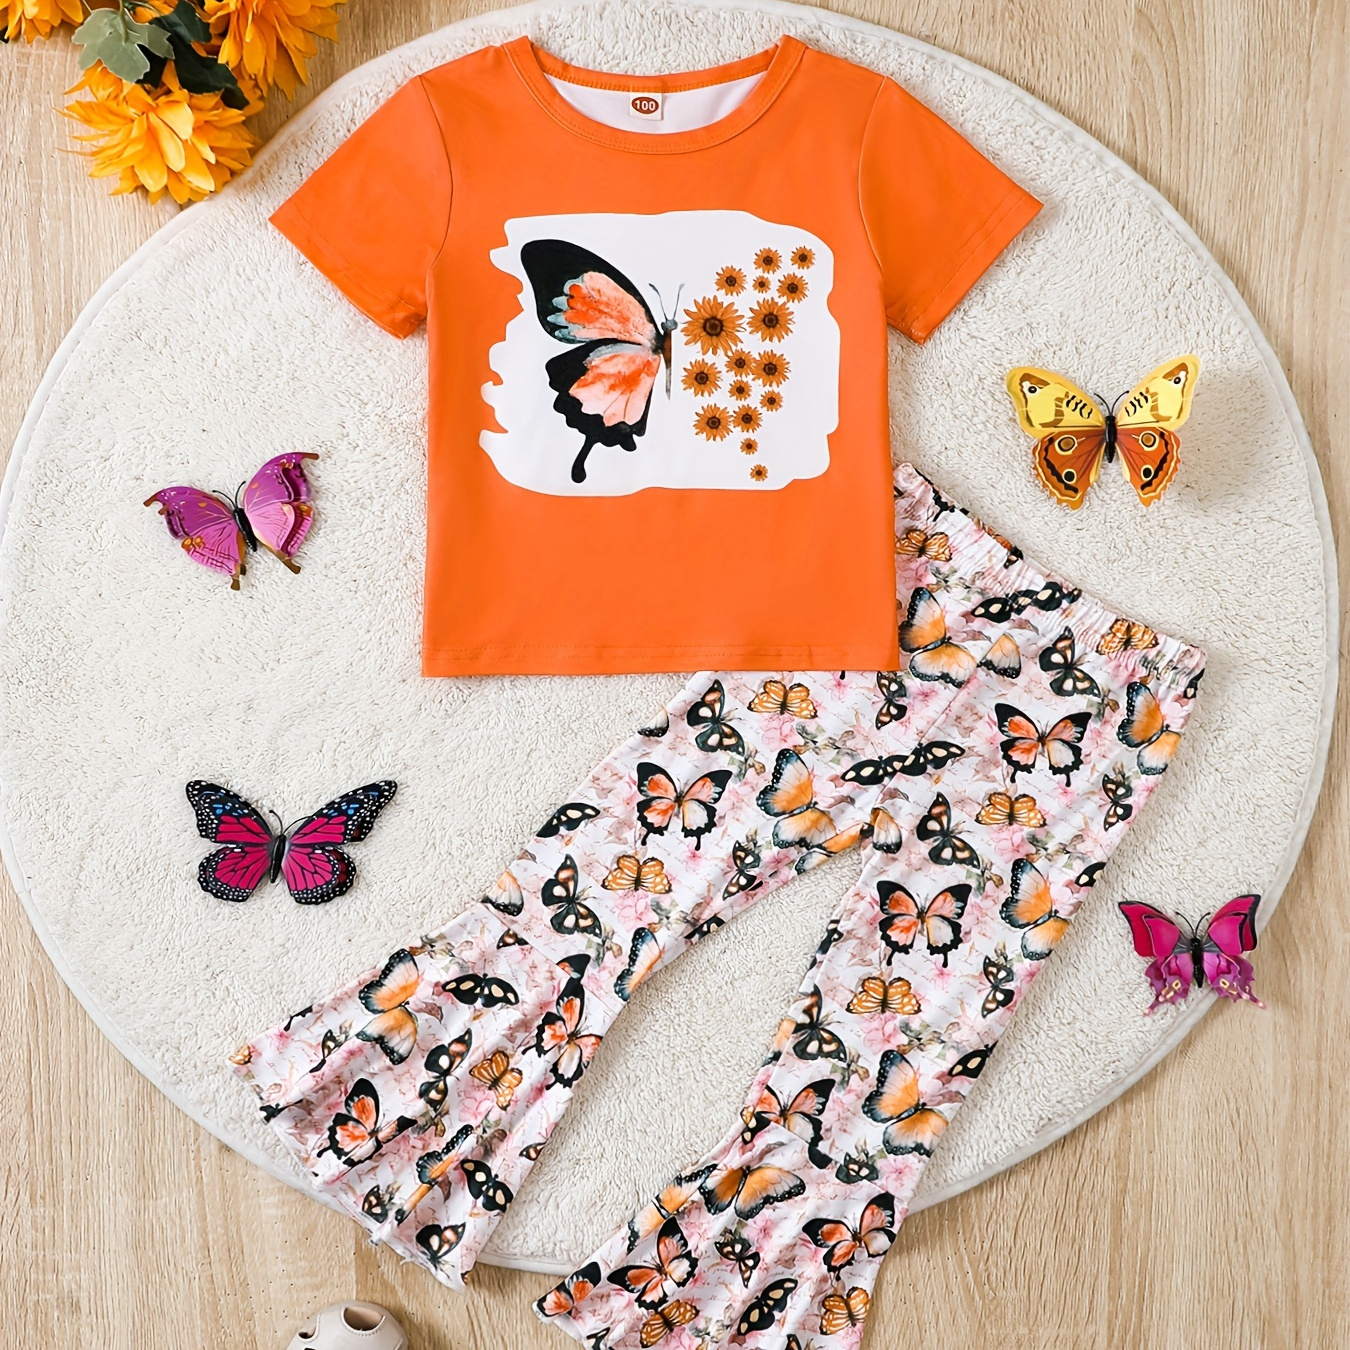 

2pcs Toddler Girls Sunflower Graphic T-shirt Round Neck Short Sleeve Tee Tops & Butterfly Graphic Flare Leg Pants Set Kids Spring Summer Clothes